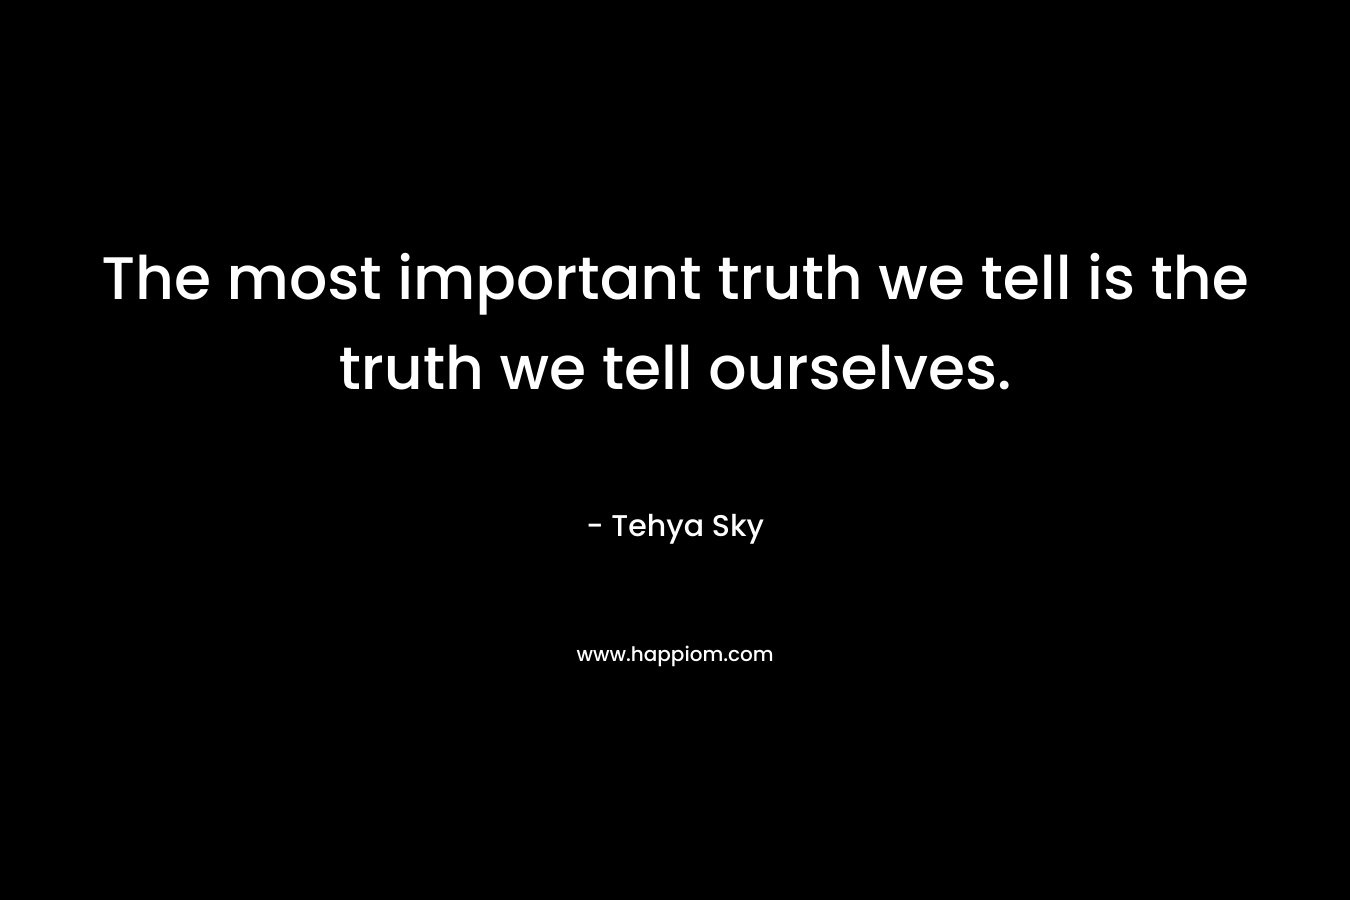 The most important truth we tell is the truth we tell ourselves. – Tehya Sky